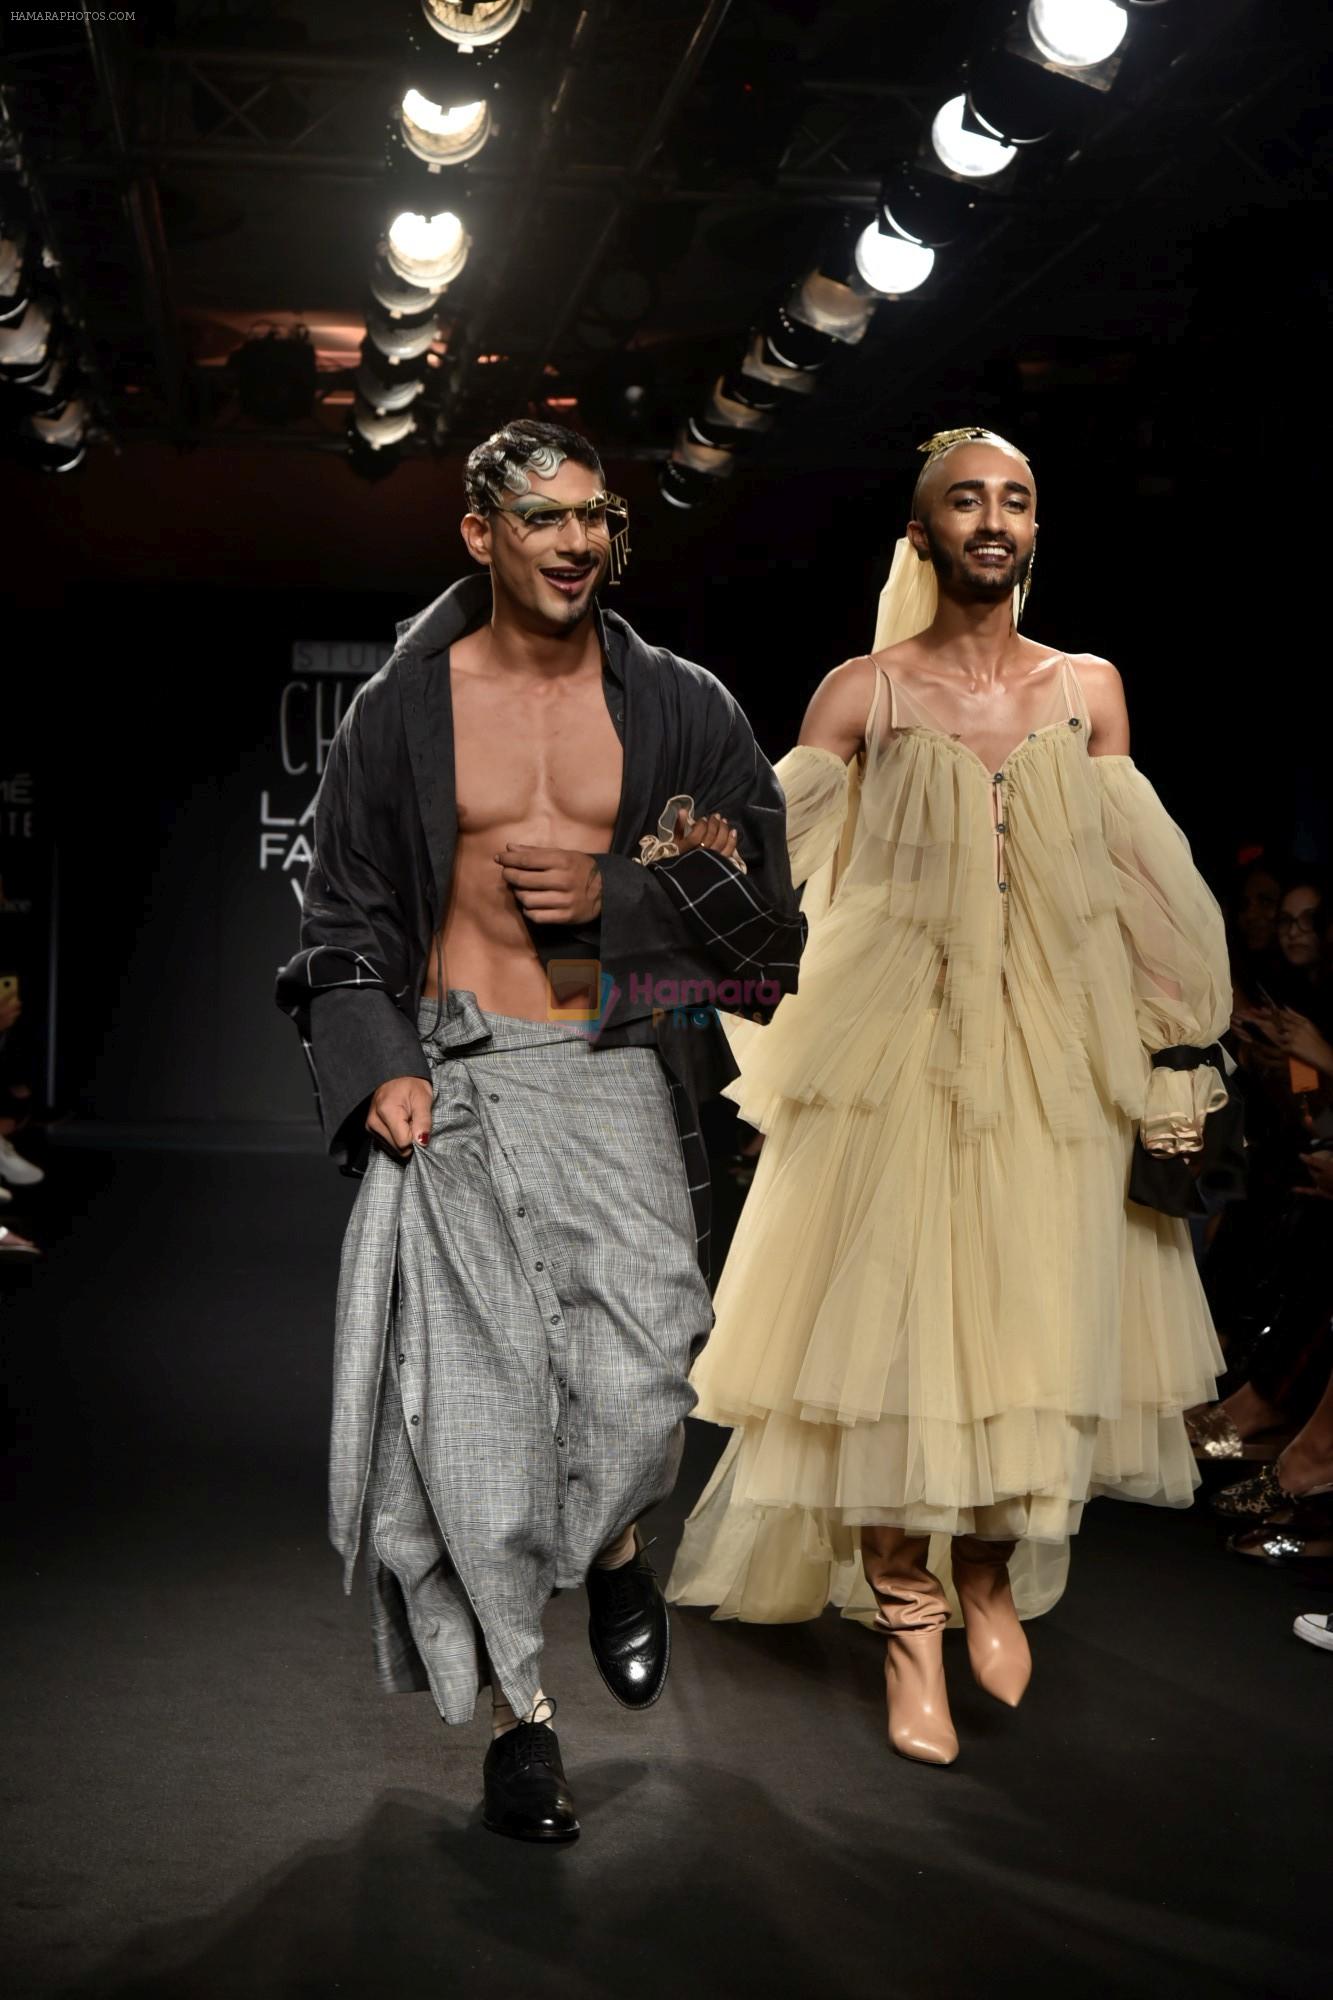 Prateik Babbar as the show stopper for BYE FELICIA BY CHOLA at Lakme Fashion Show on 22nd Aug 2018